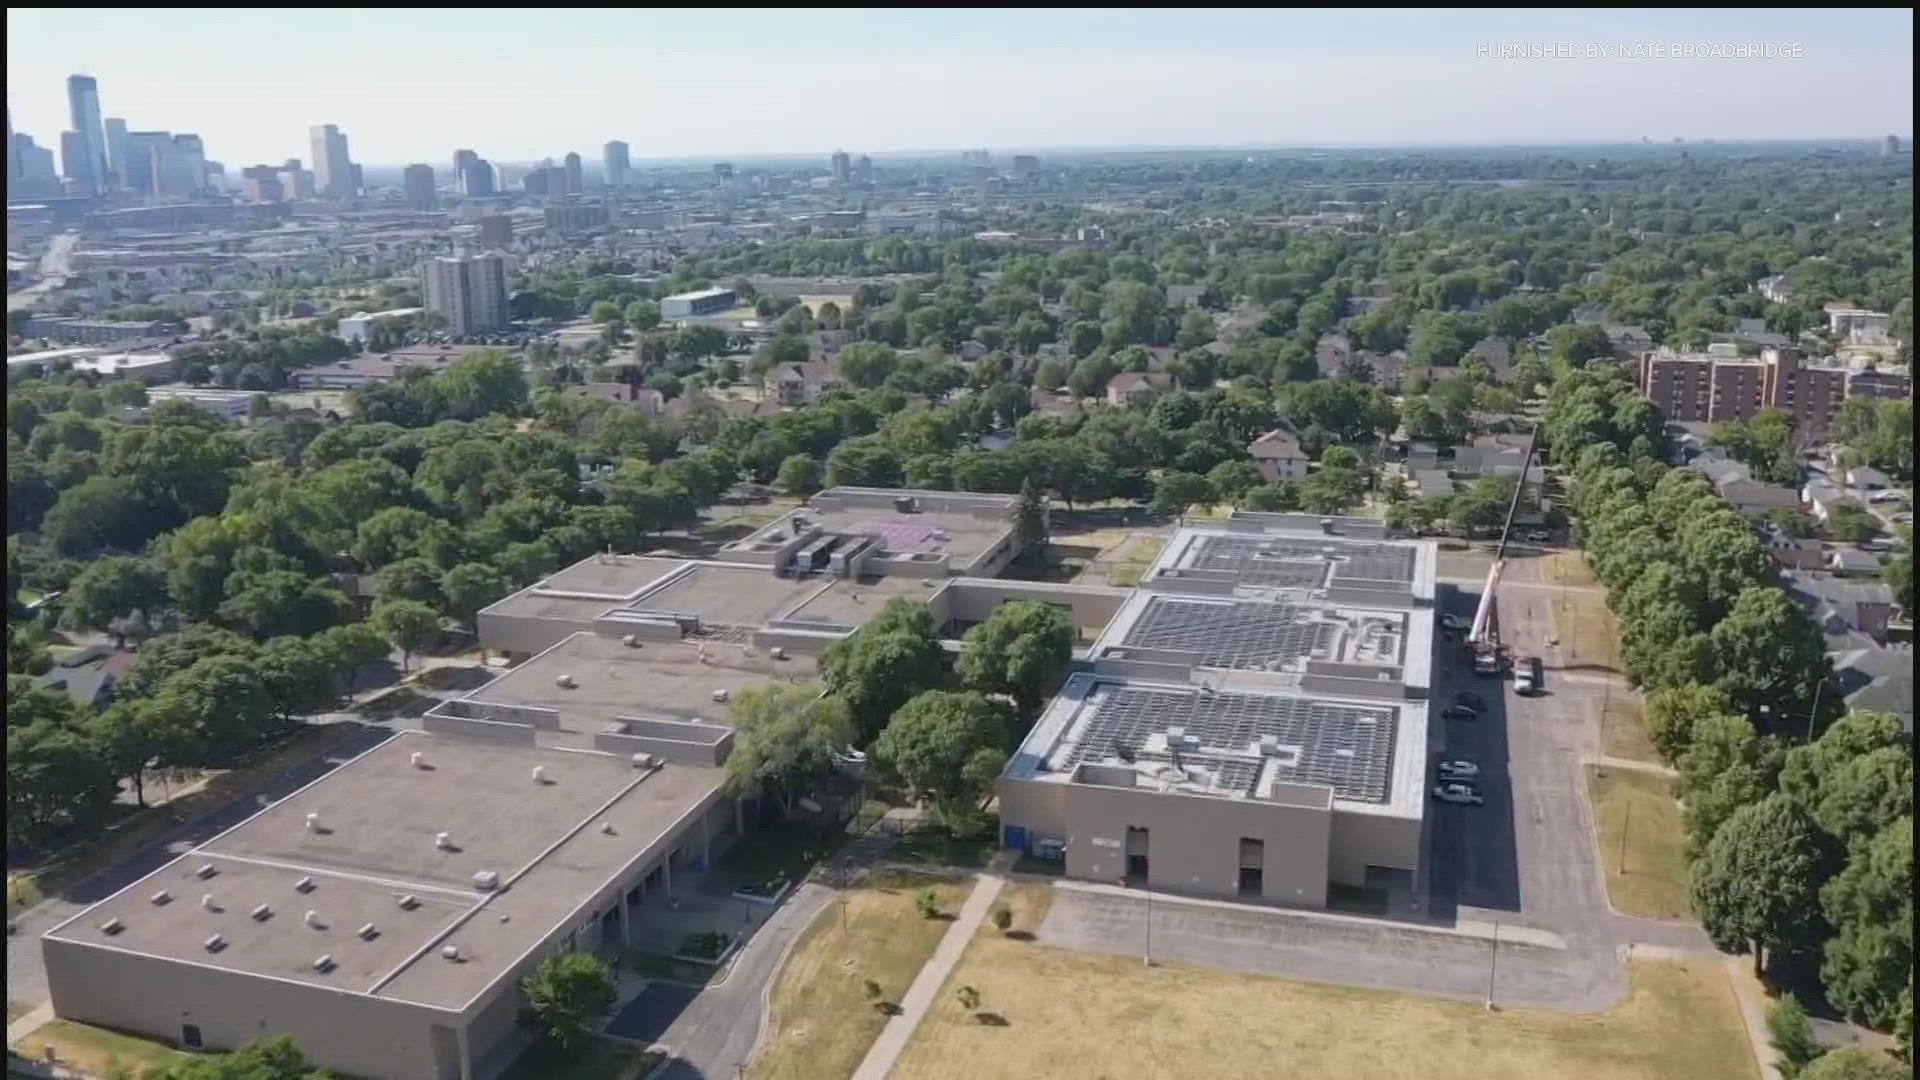 900 solar panels placed on the roof of the high school that will bring renewable energy and energy pay backs to a low-income community.